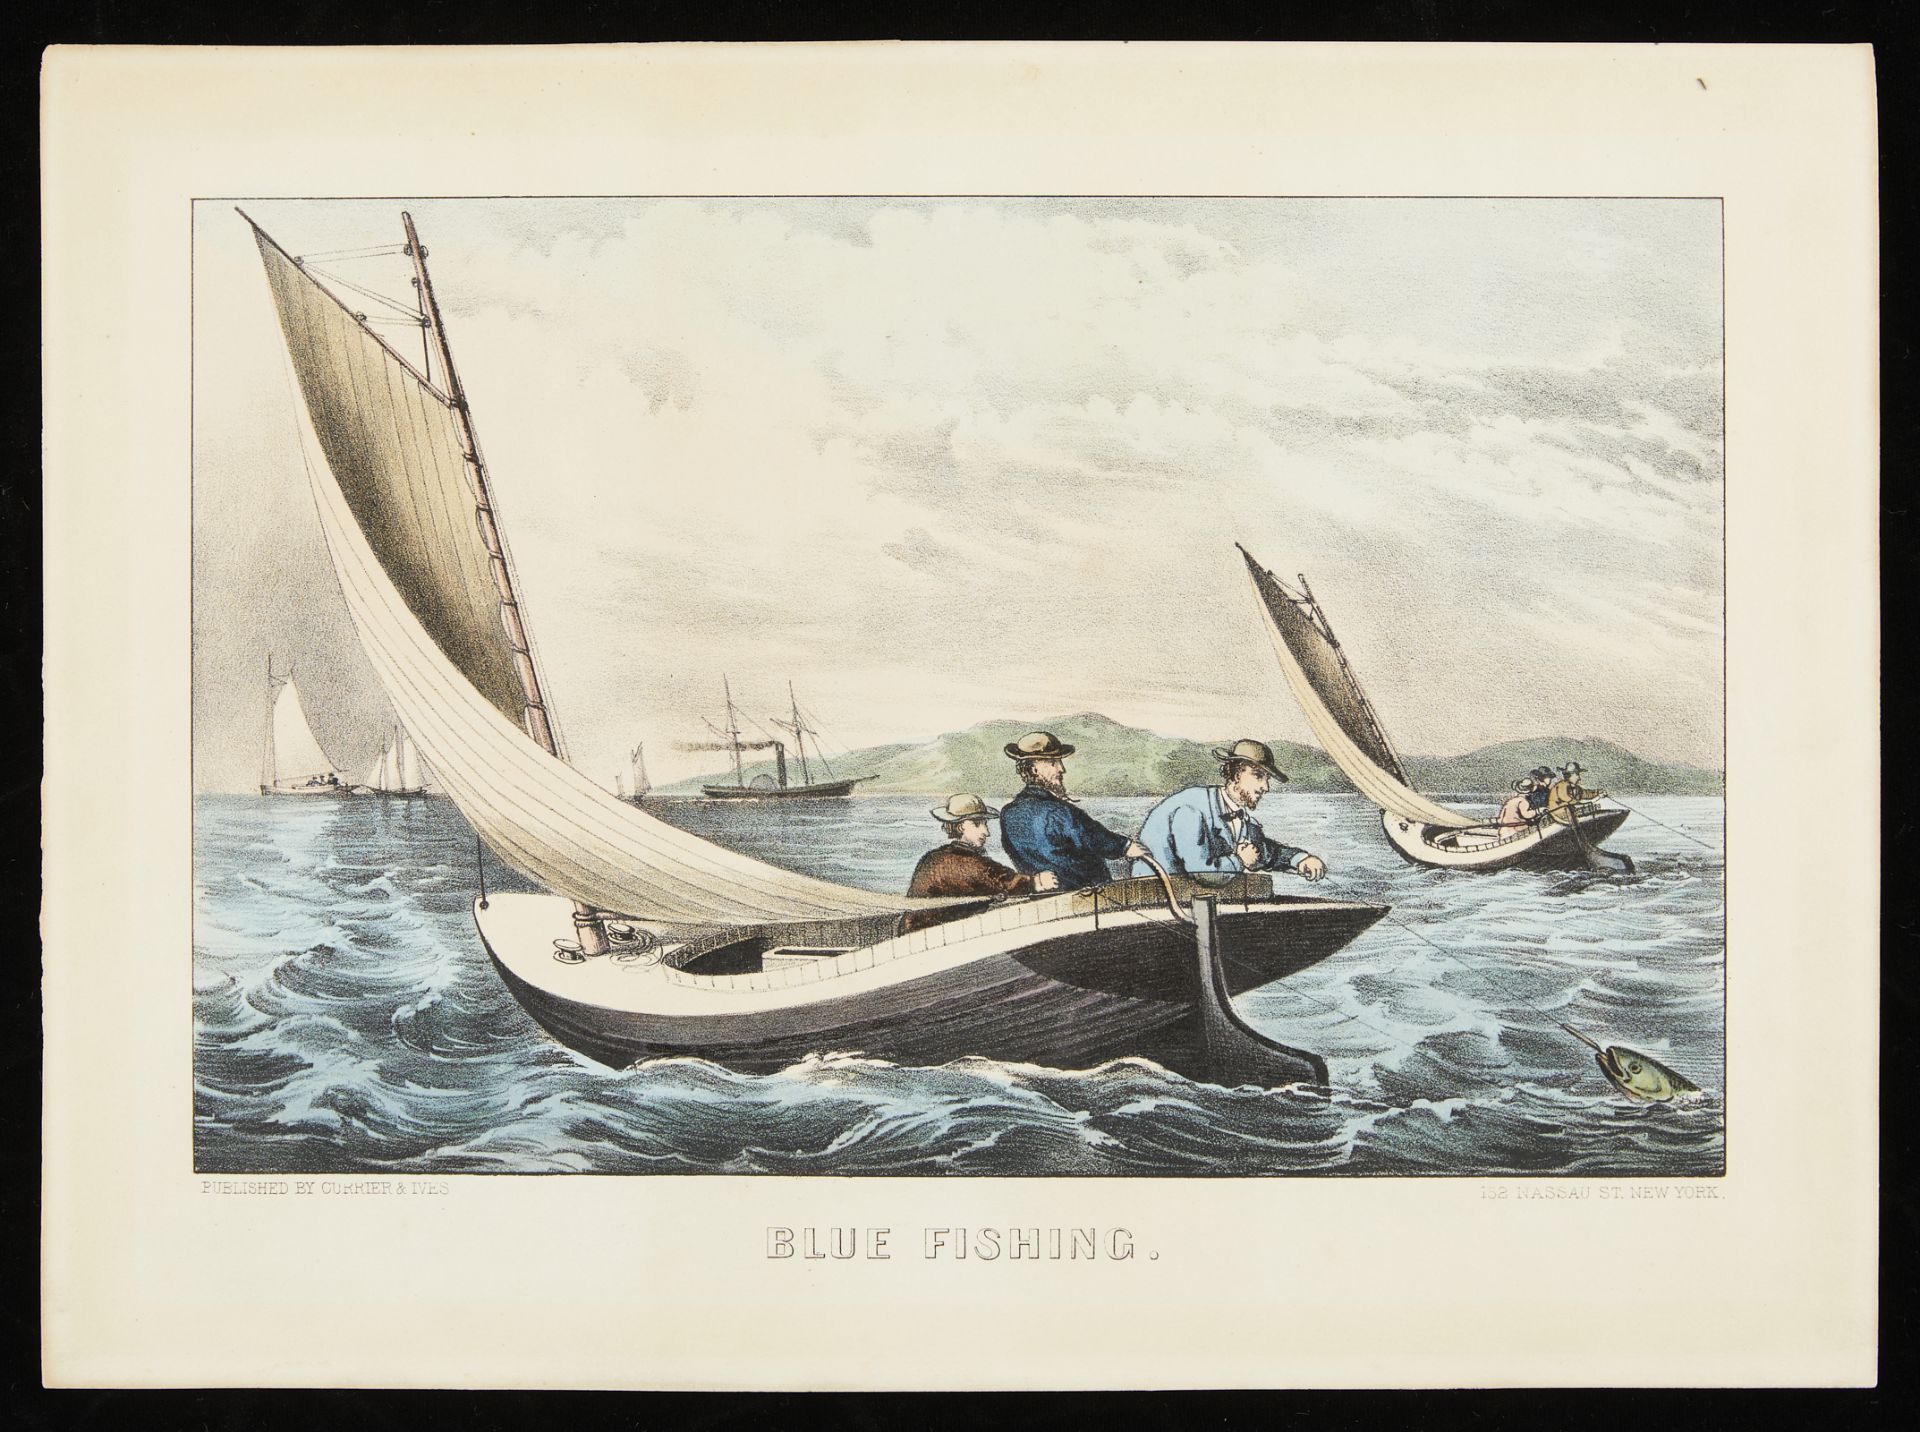 Currier & Ives "Blue Fishing" Print - Image 3 of 8